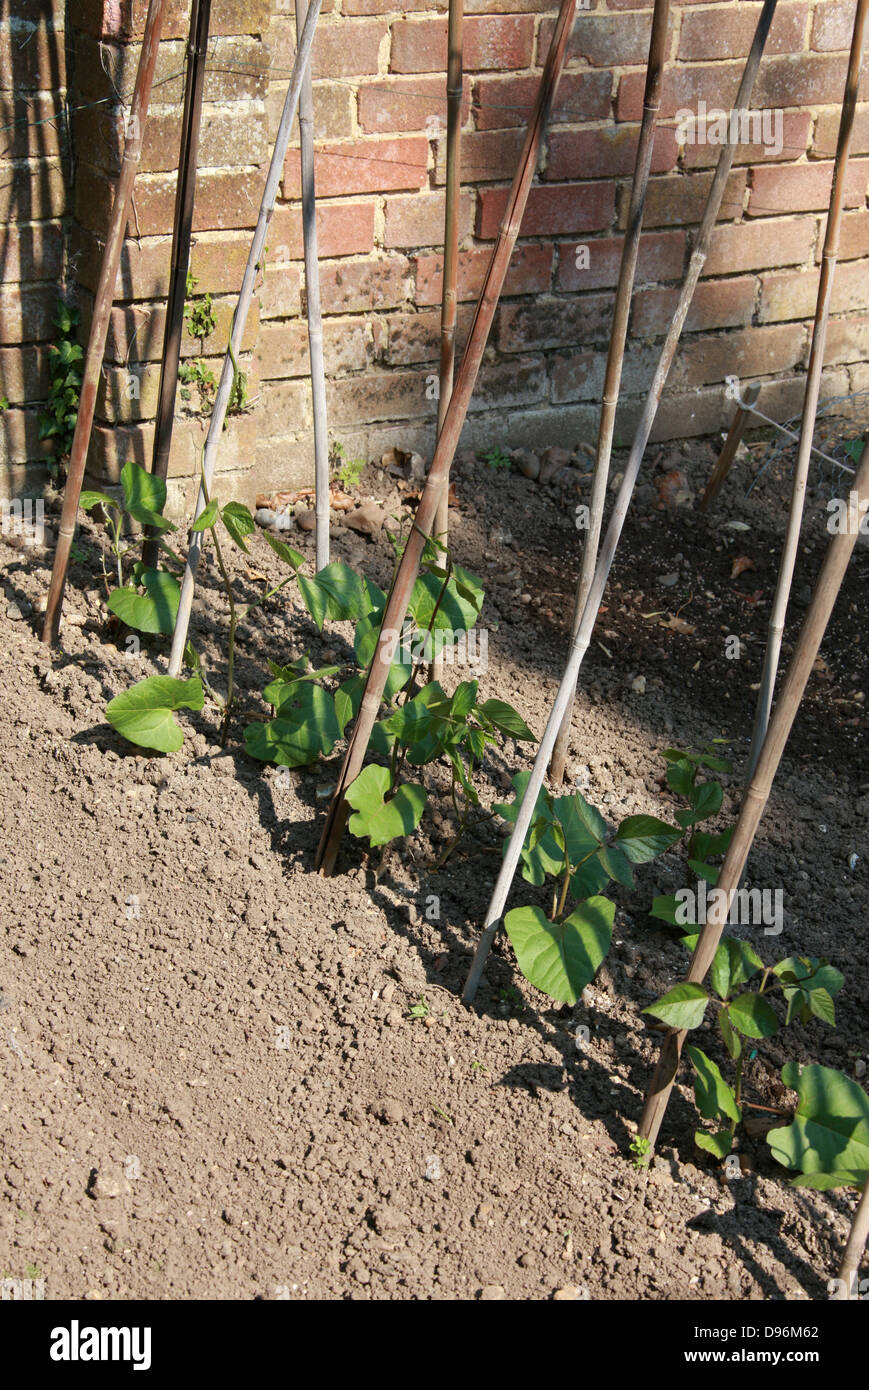 Young Runner Bean Plants Growing Up Support Bamboo Canes in an English Garden. Stock Photo